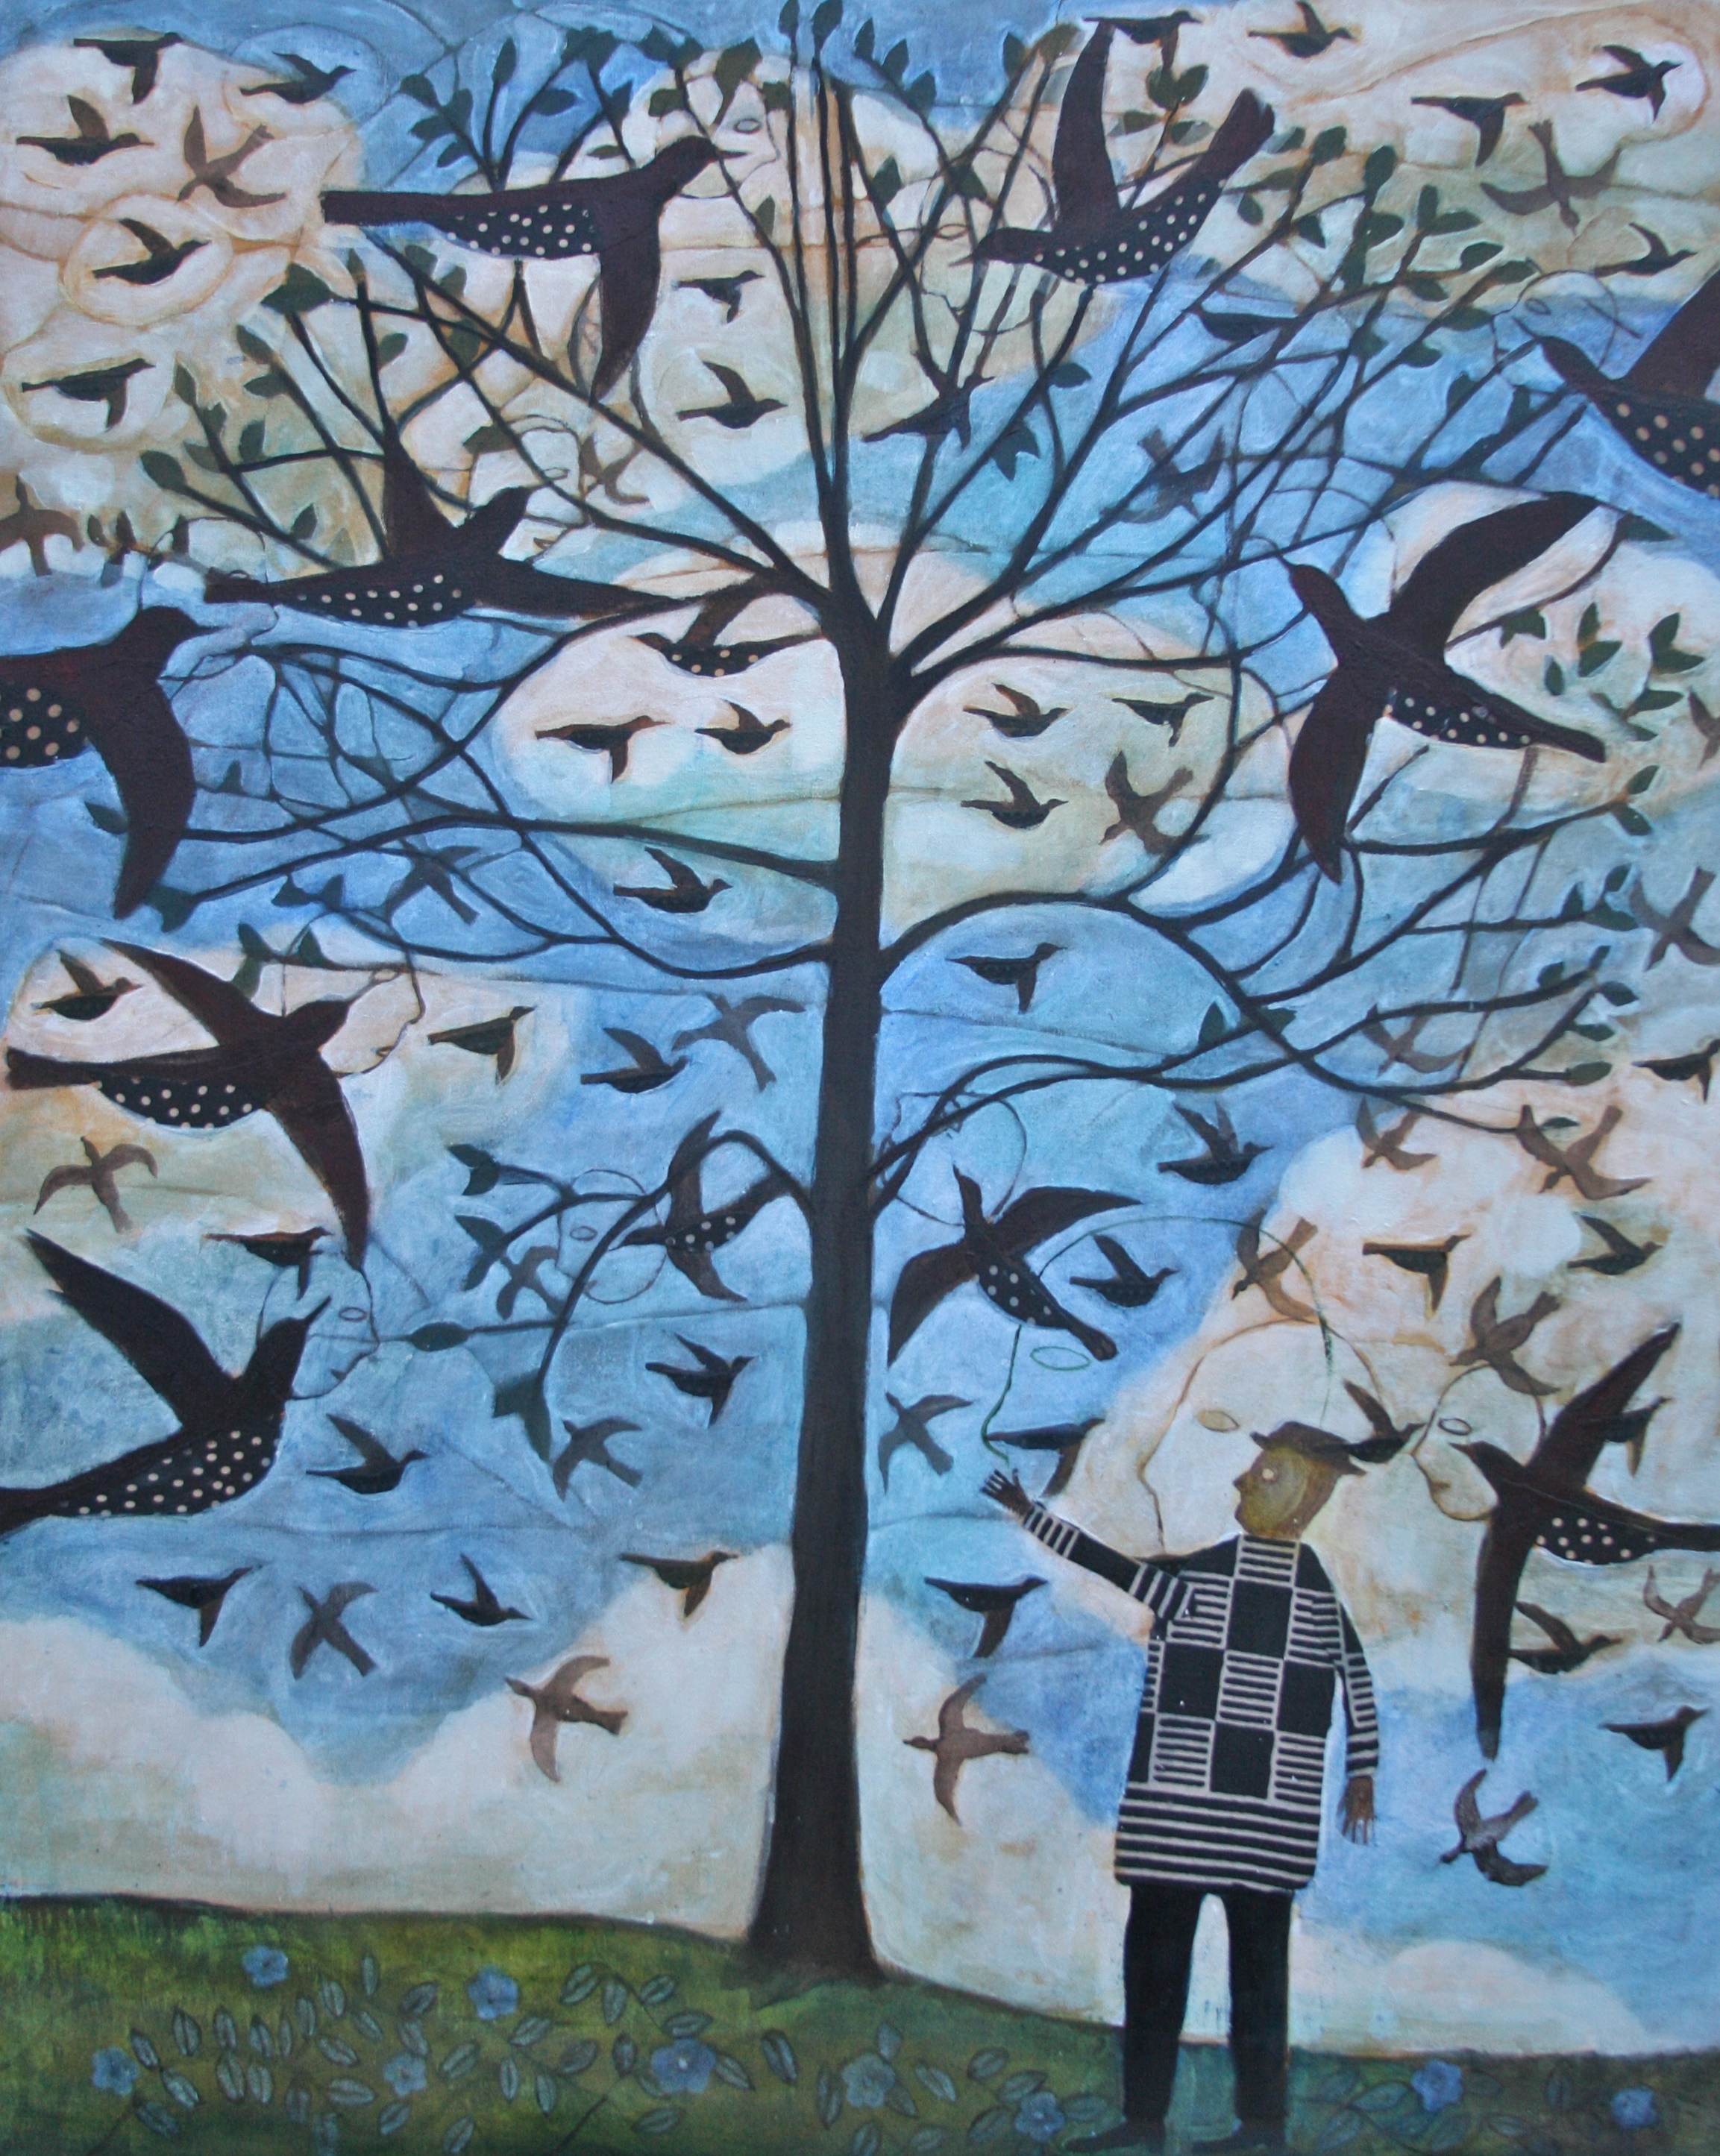 Man Having a Discussion with Birds In a Tree